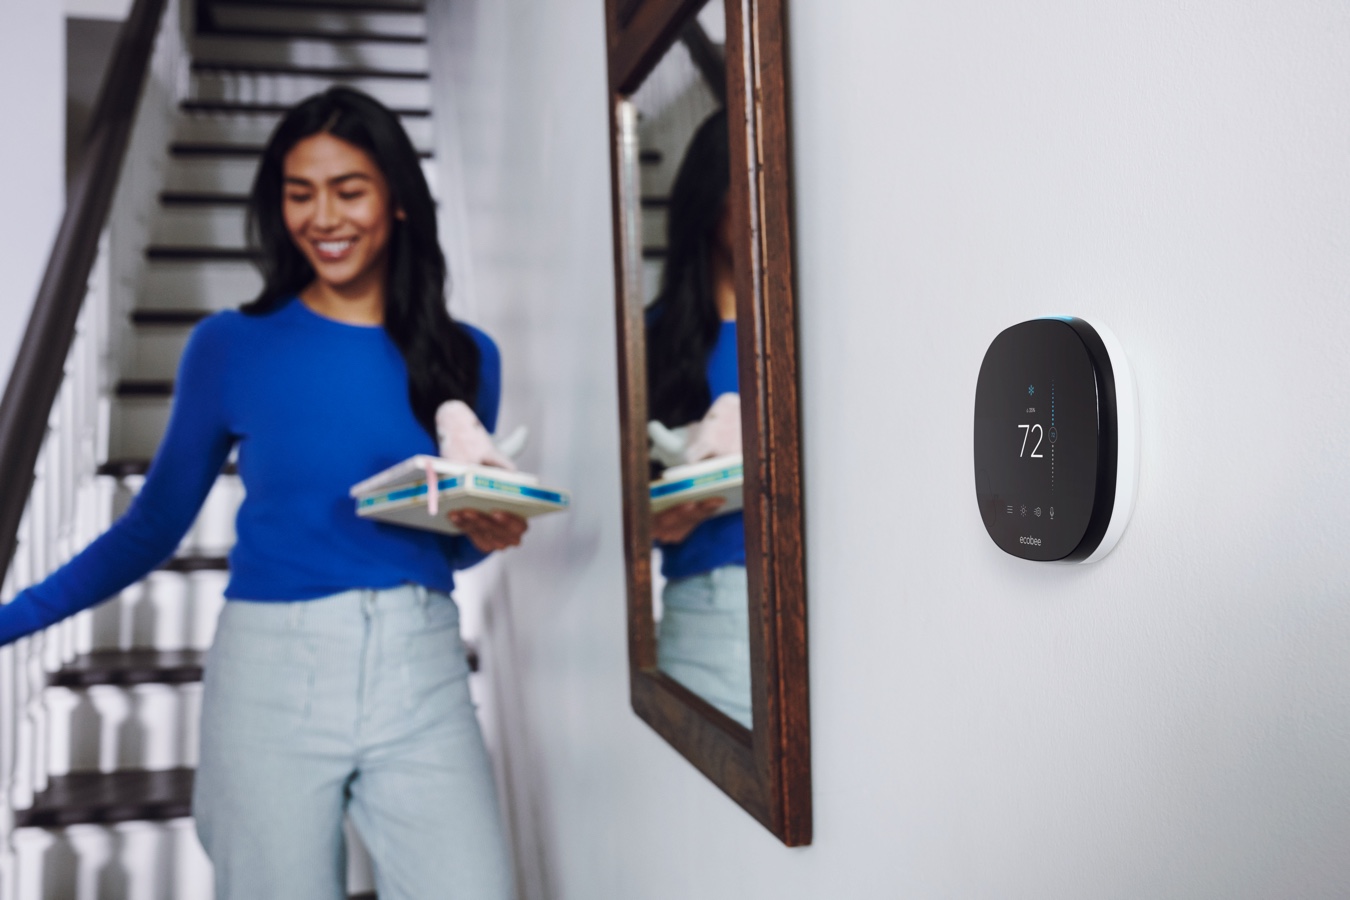 A woman walks down stairs in her home. There is a smart thermostat on the wall near her.